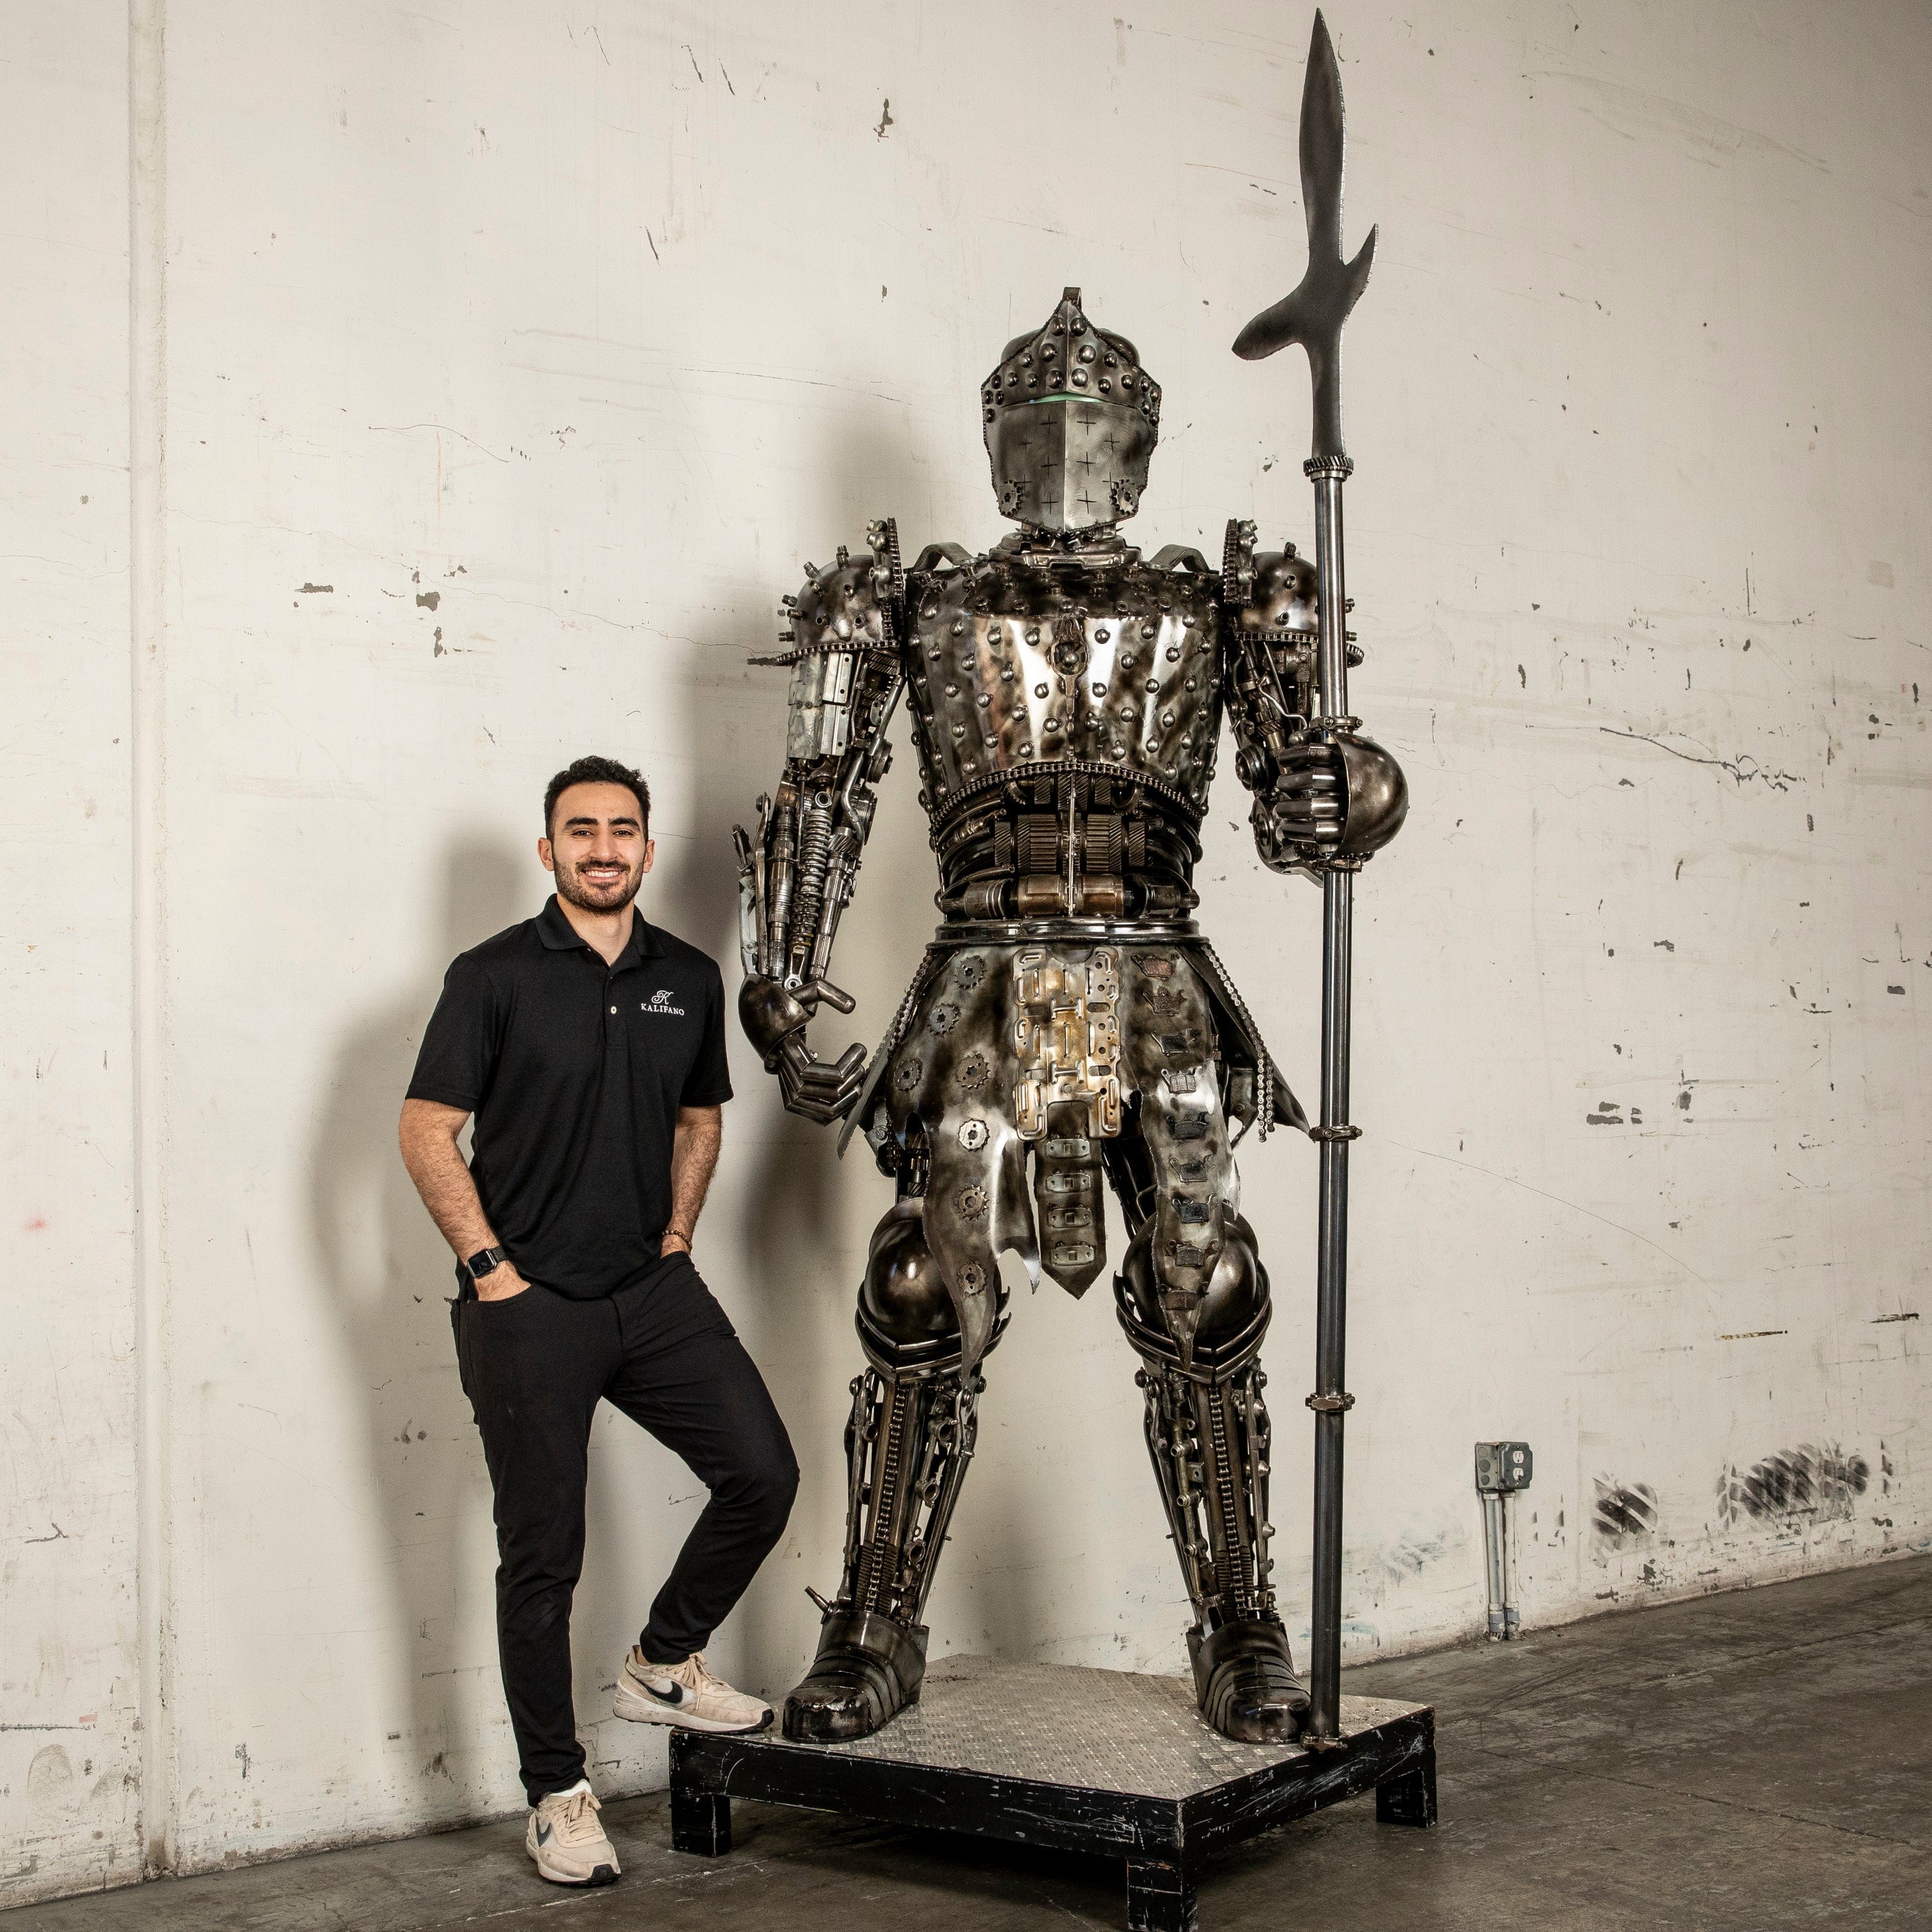 Kalifano Recycled Metal Art Knight Recycled Metal Art Sculpture - 7 ft 6 in Tall RMS-KN230-S09